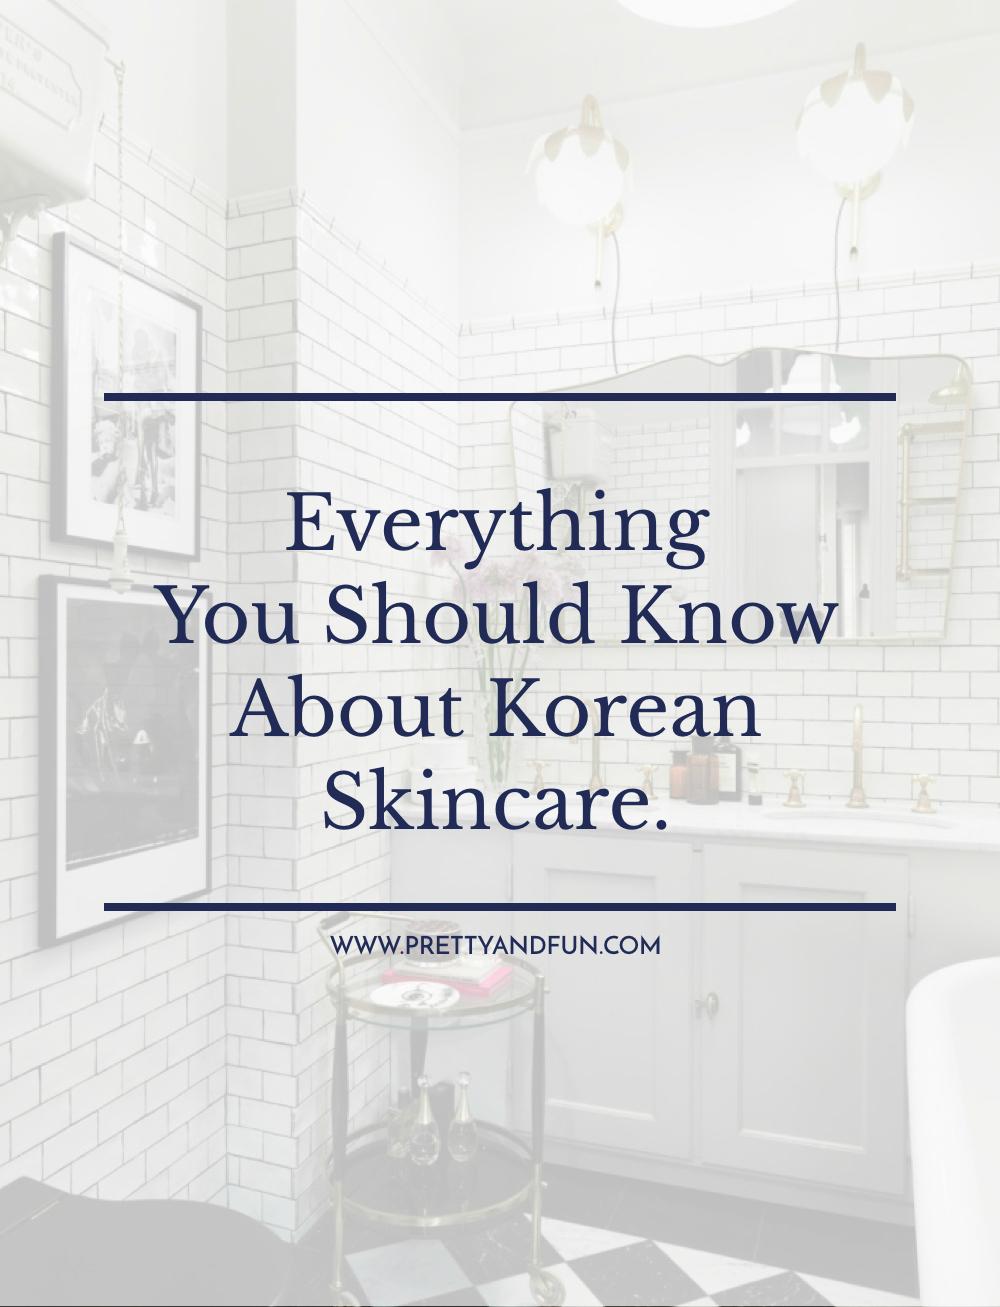 Everything To Know About Korean Skincare.